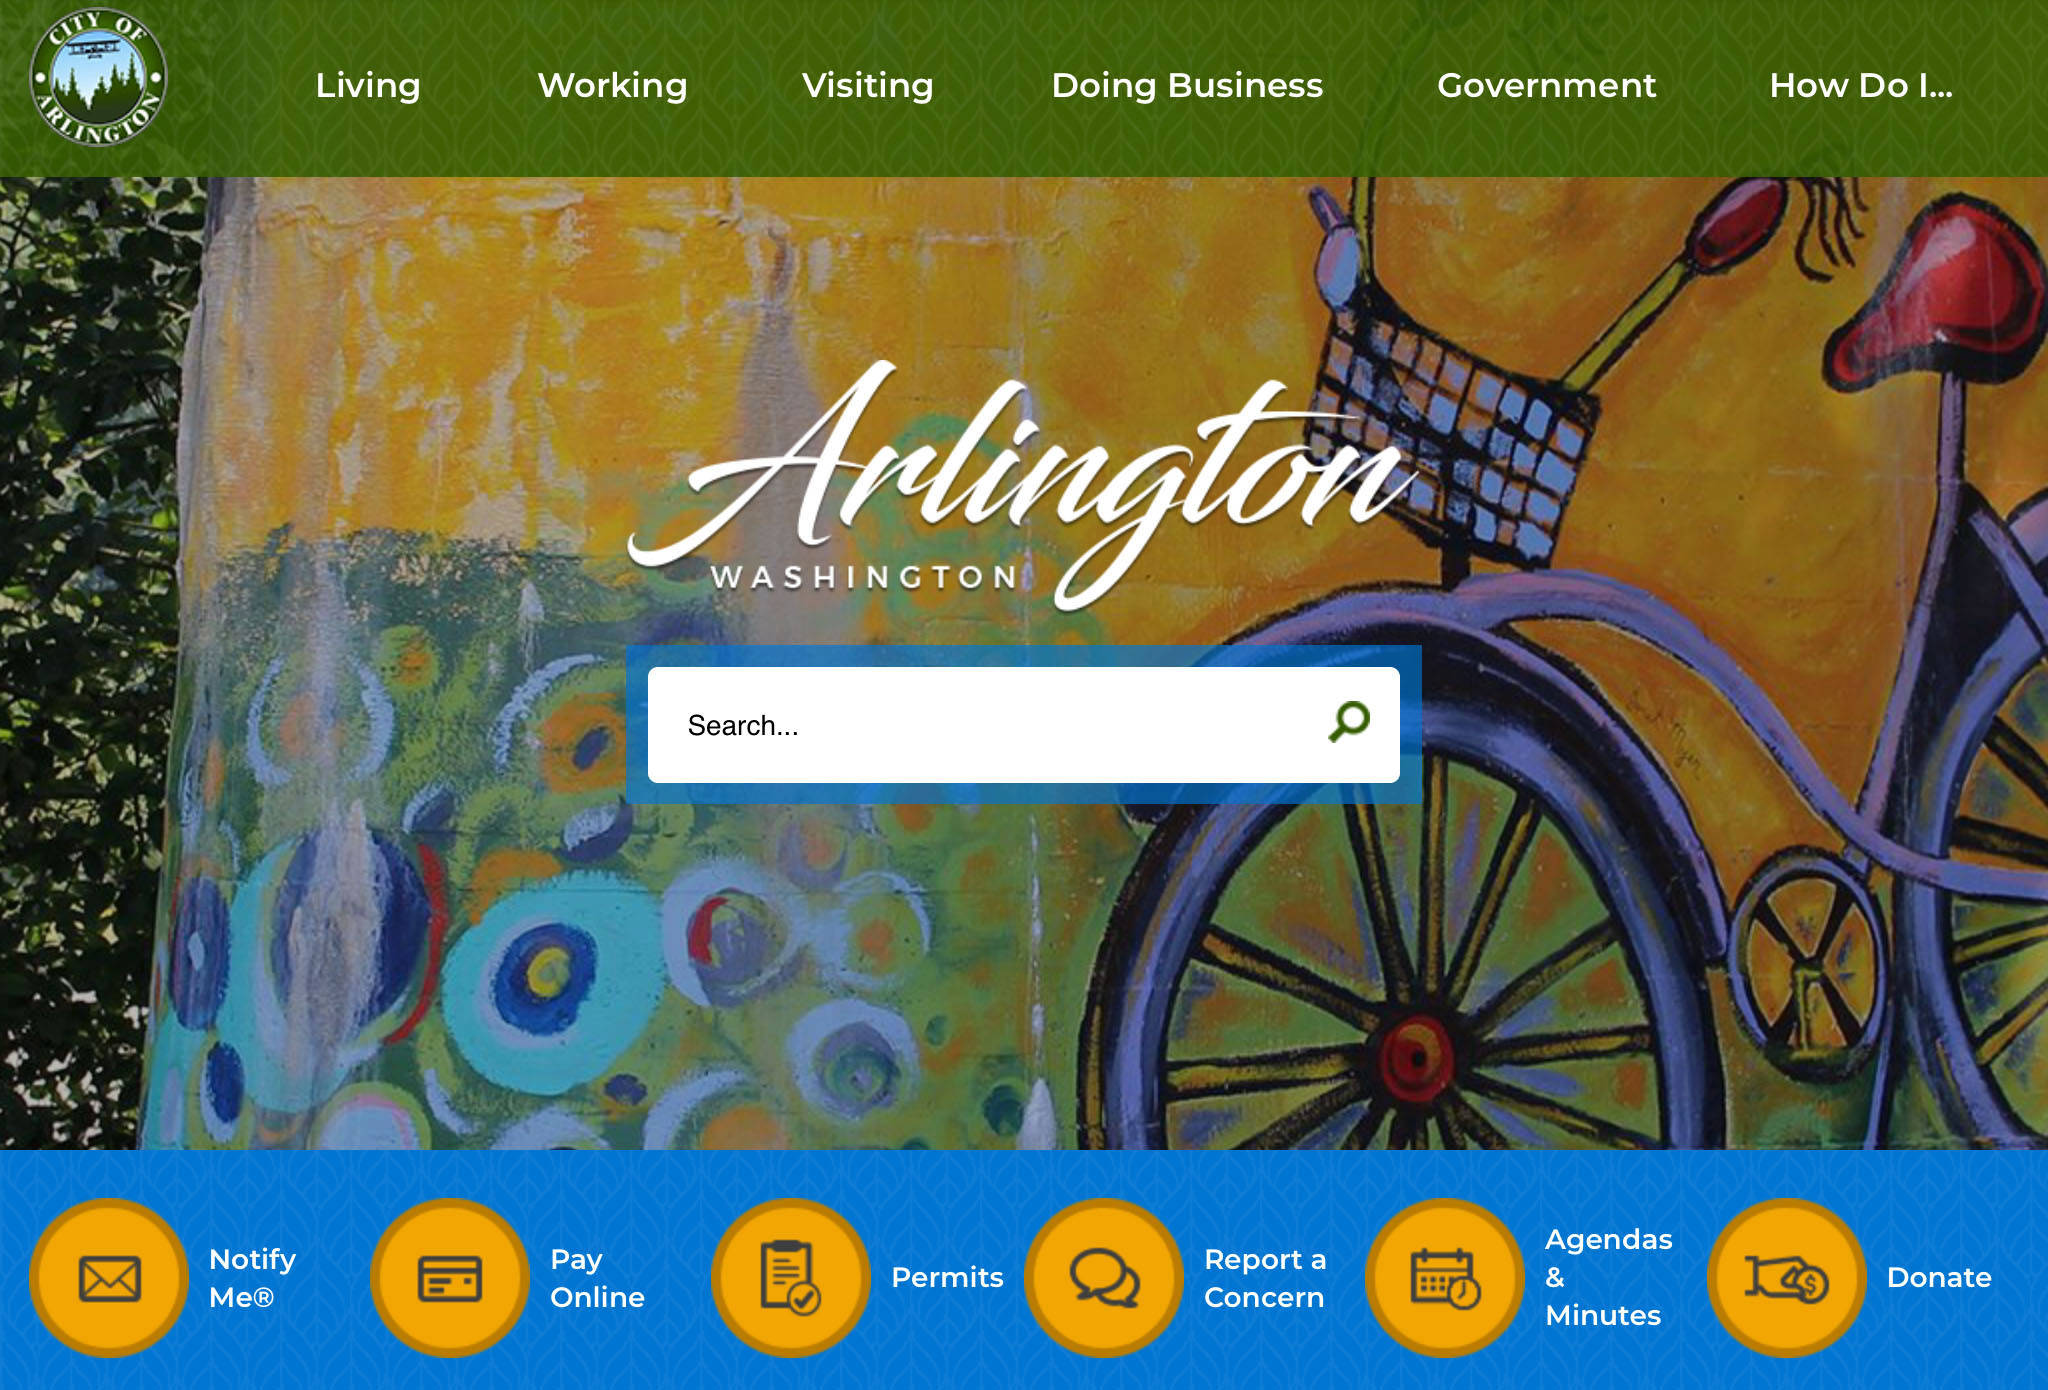 Welcome page for the new city of Arlington website at www.arlingtonwa.gov.